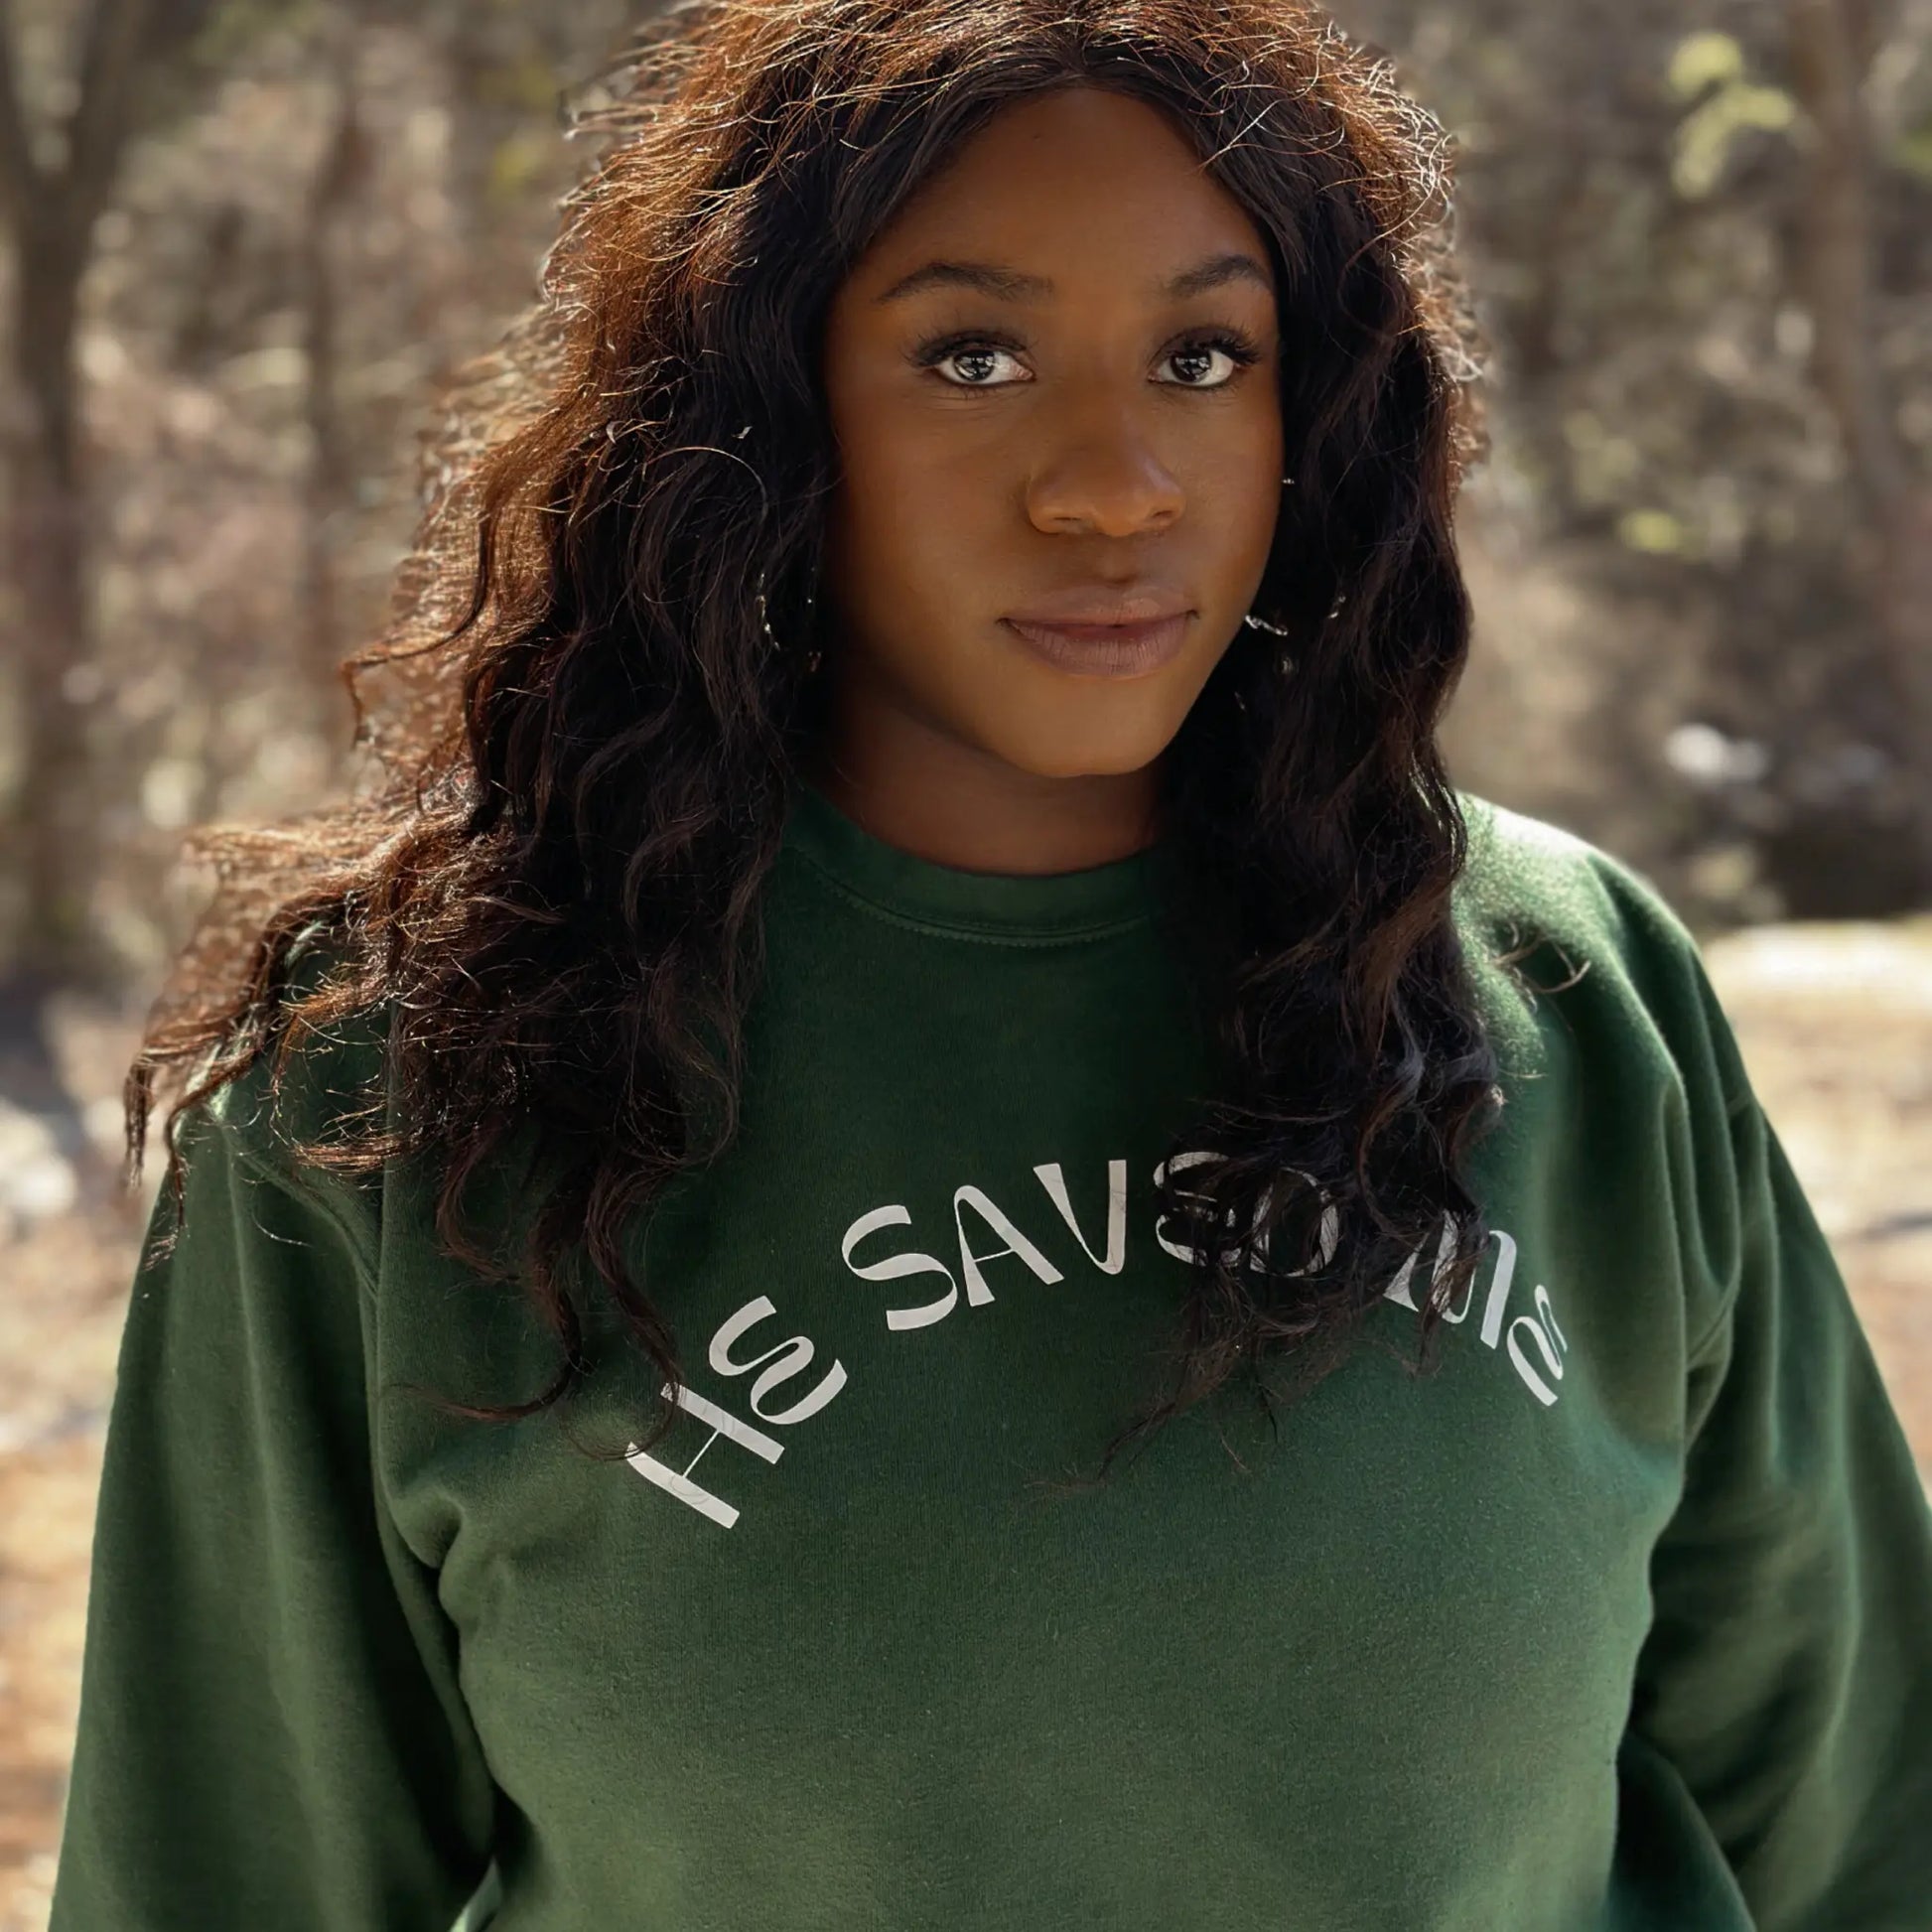 Forest Green premium crew neck sweatshirt. This sweatshirt reads "He Saved Me'" on the front in white letters. The fit is comfy and thick. From Crown of Favor Forrest Green He saved me sweatshirt crewneck. He Saved Me sweatshirt. Christian clothing brand  